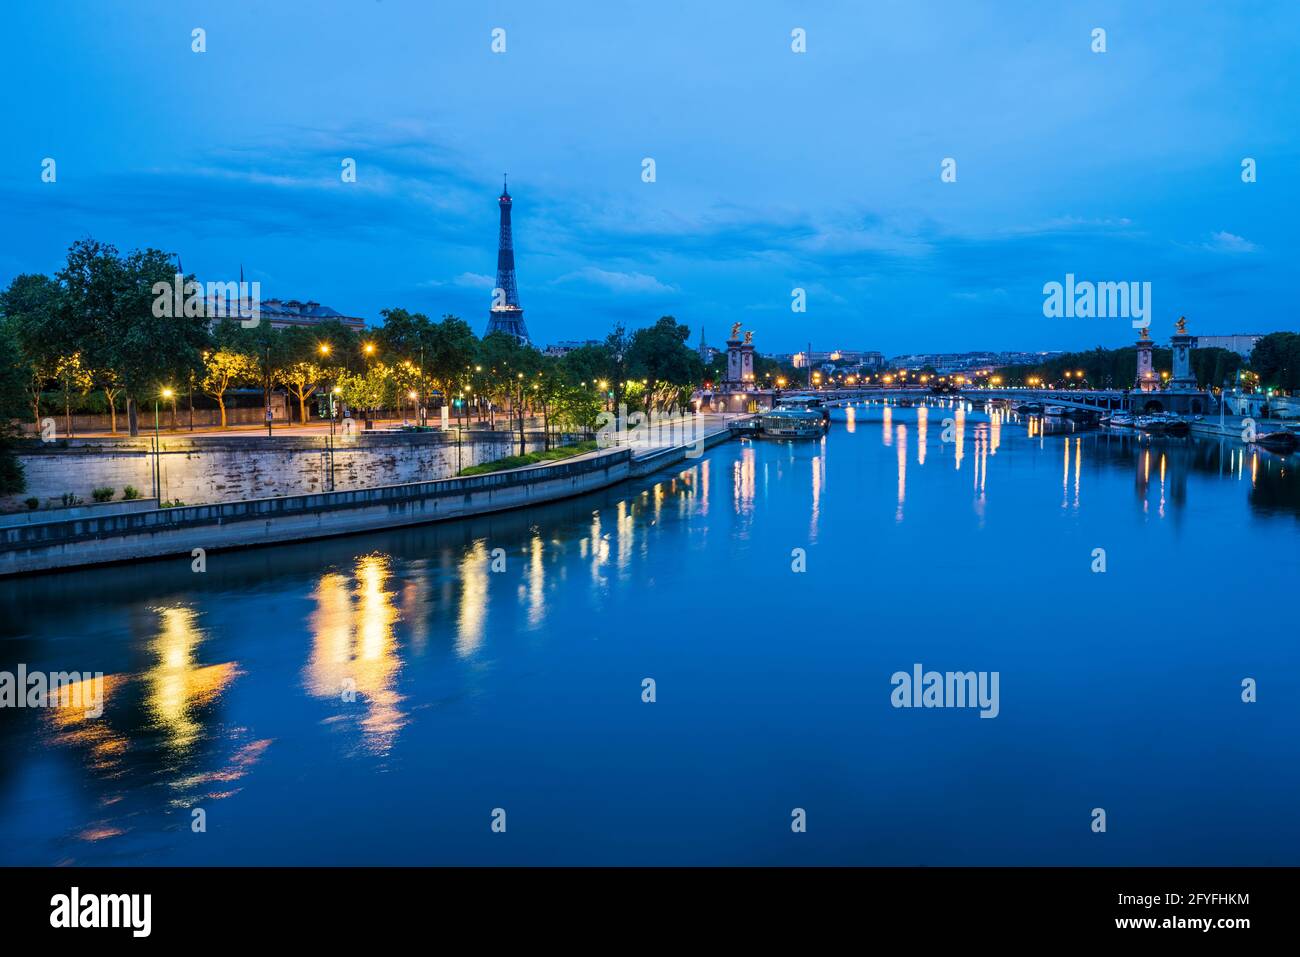 View of the tracks on the banks, the Seine , the Eiffel Tower and the Trocadero during confinement, Paris May 2020. Stock Photo